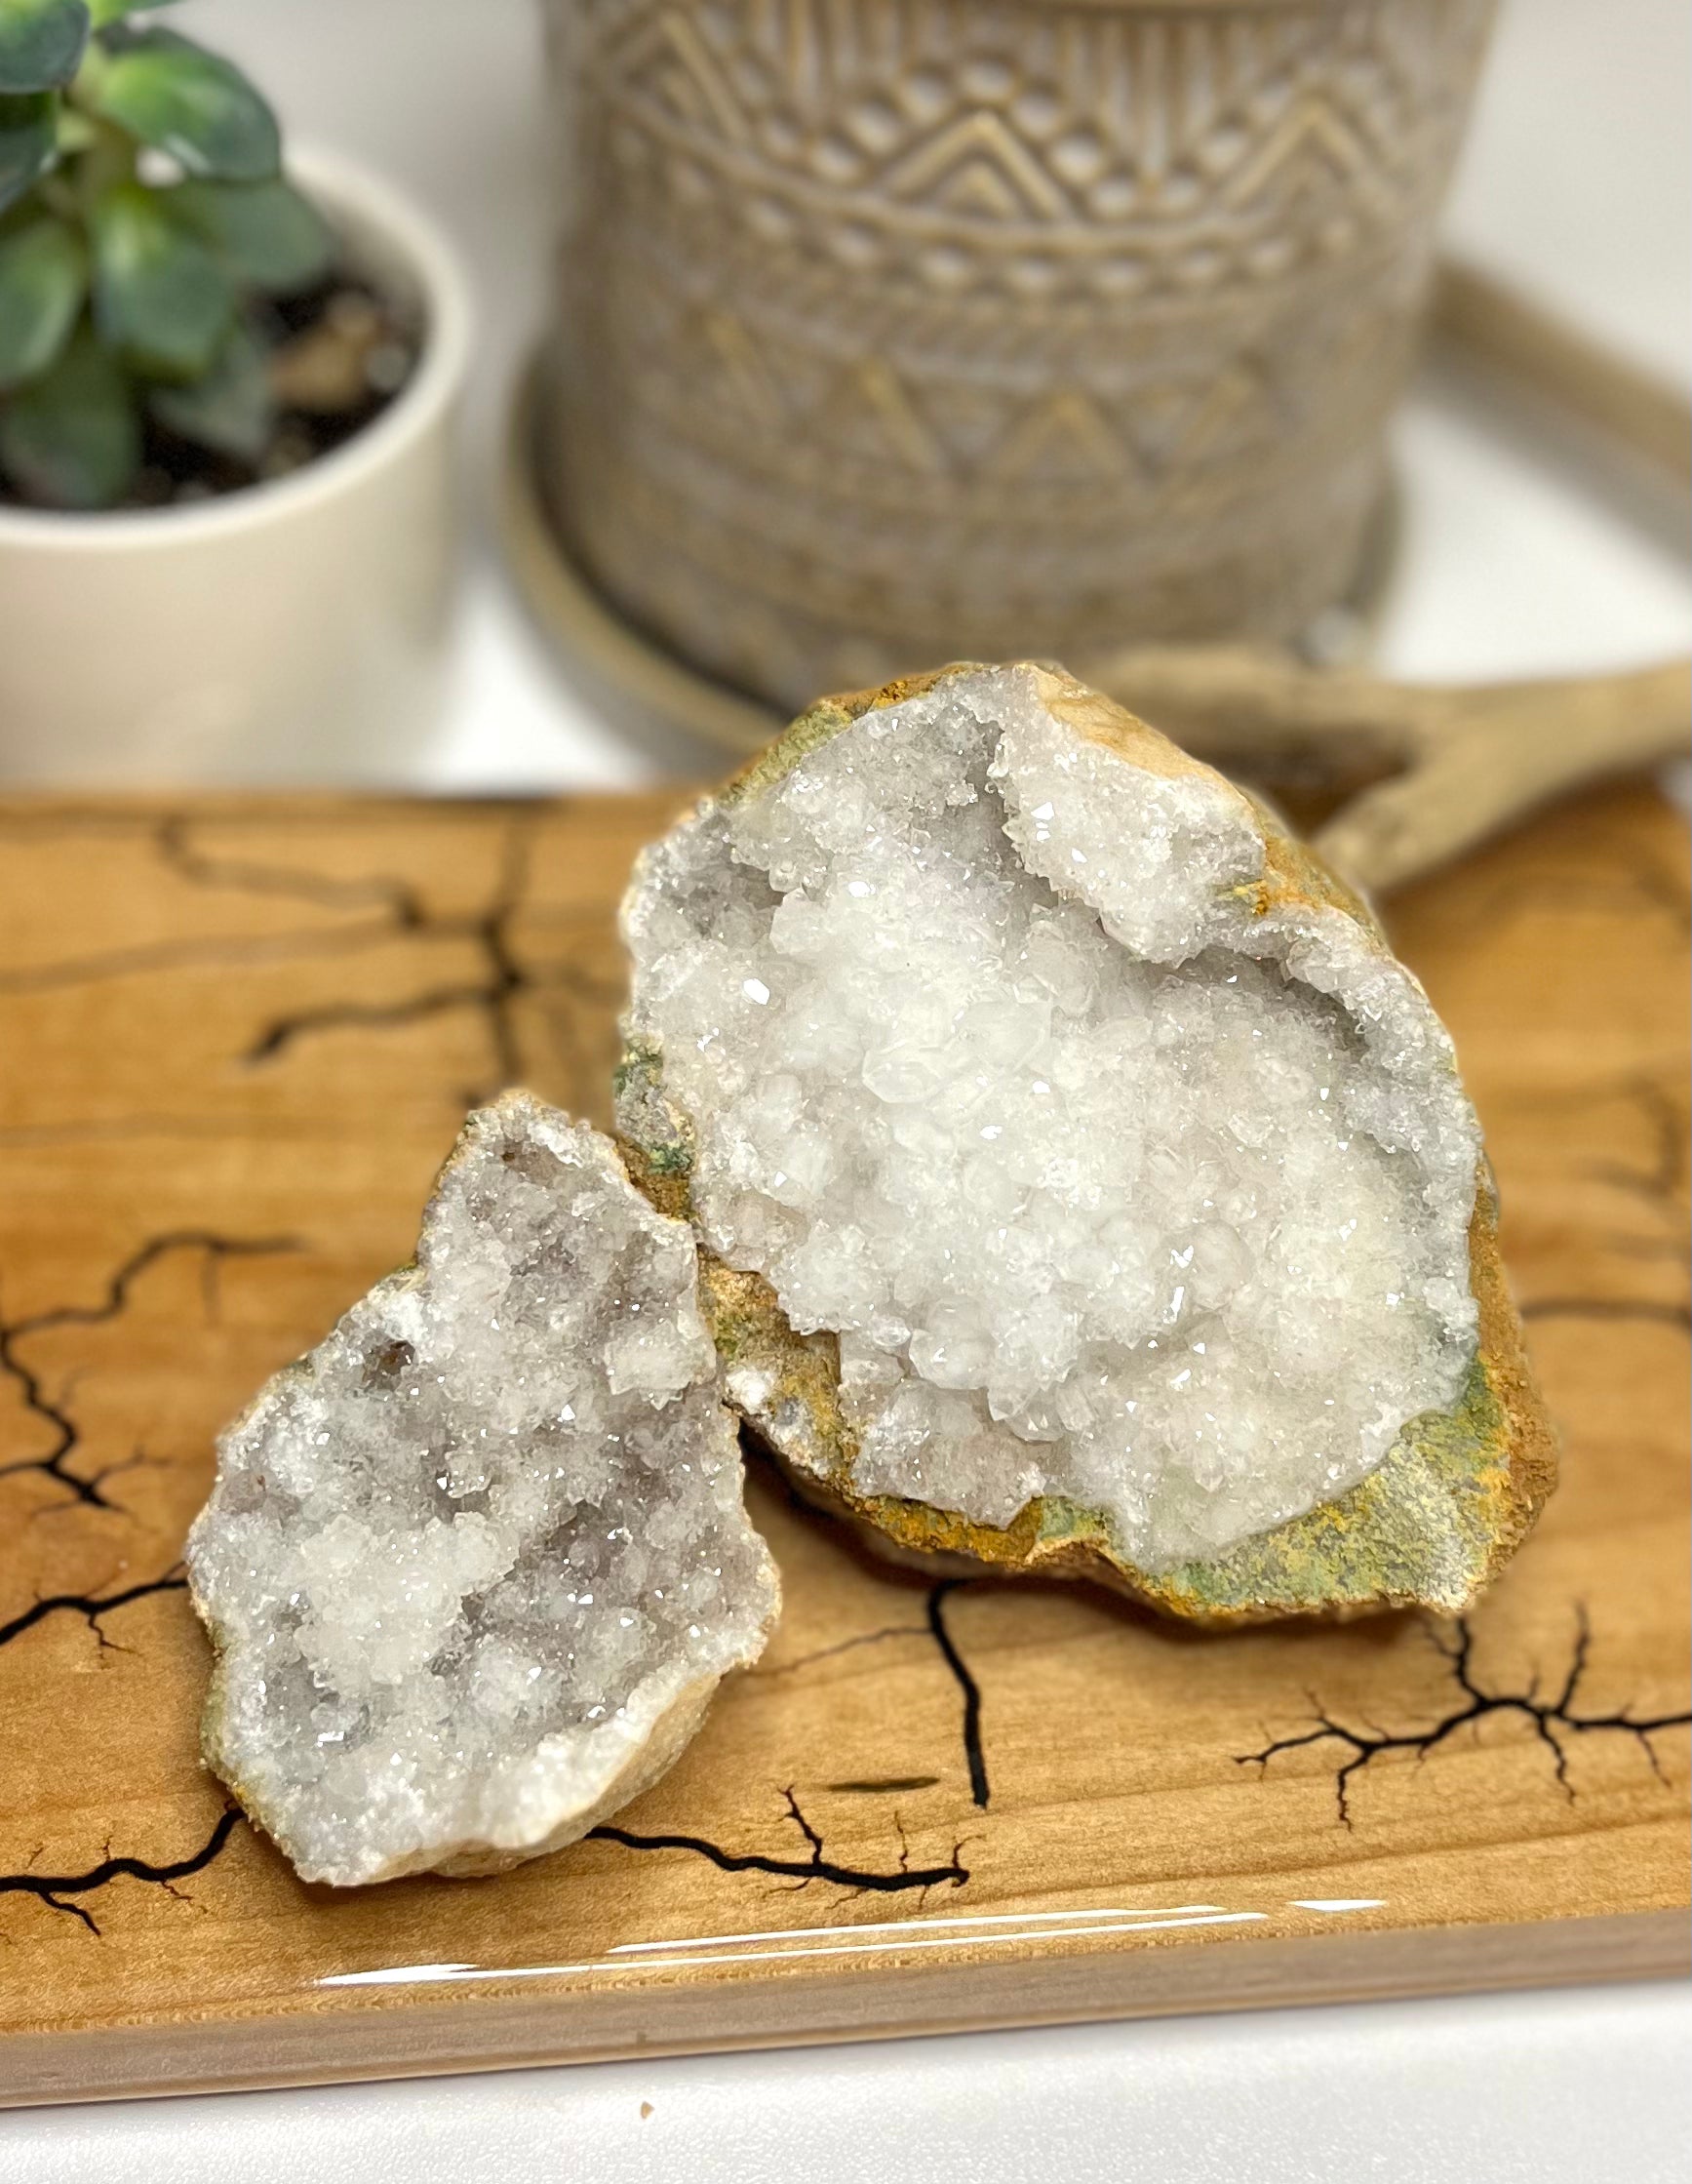 Break Your Own Geodes Lb Wholesale Bulk Lots: Choose How Many Pounds large  Unopened Moroccan Crystal Quartz Geodes, 'A' Grade -  Norway